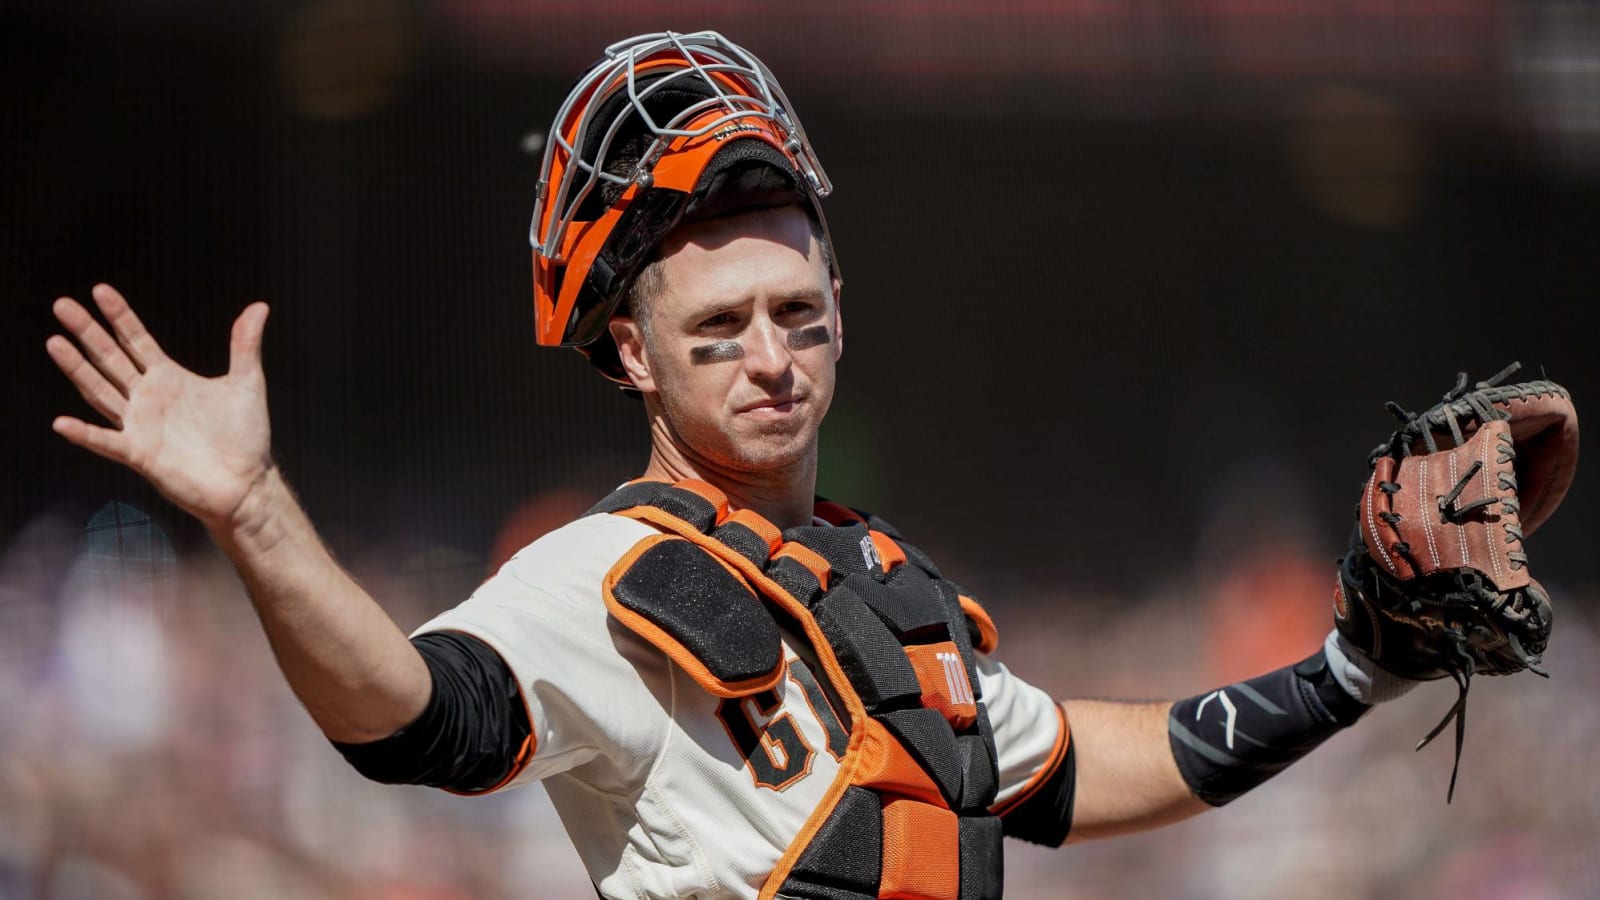 Buster posey HD wallpapers